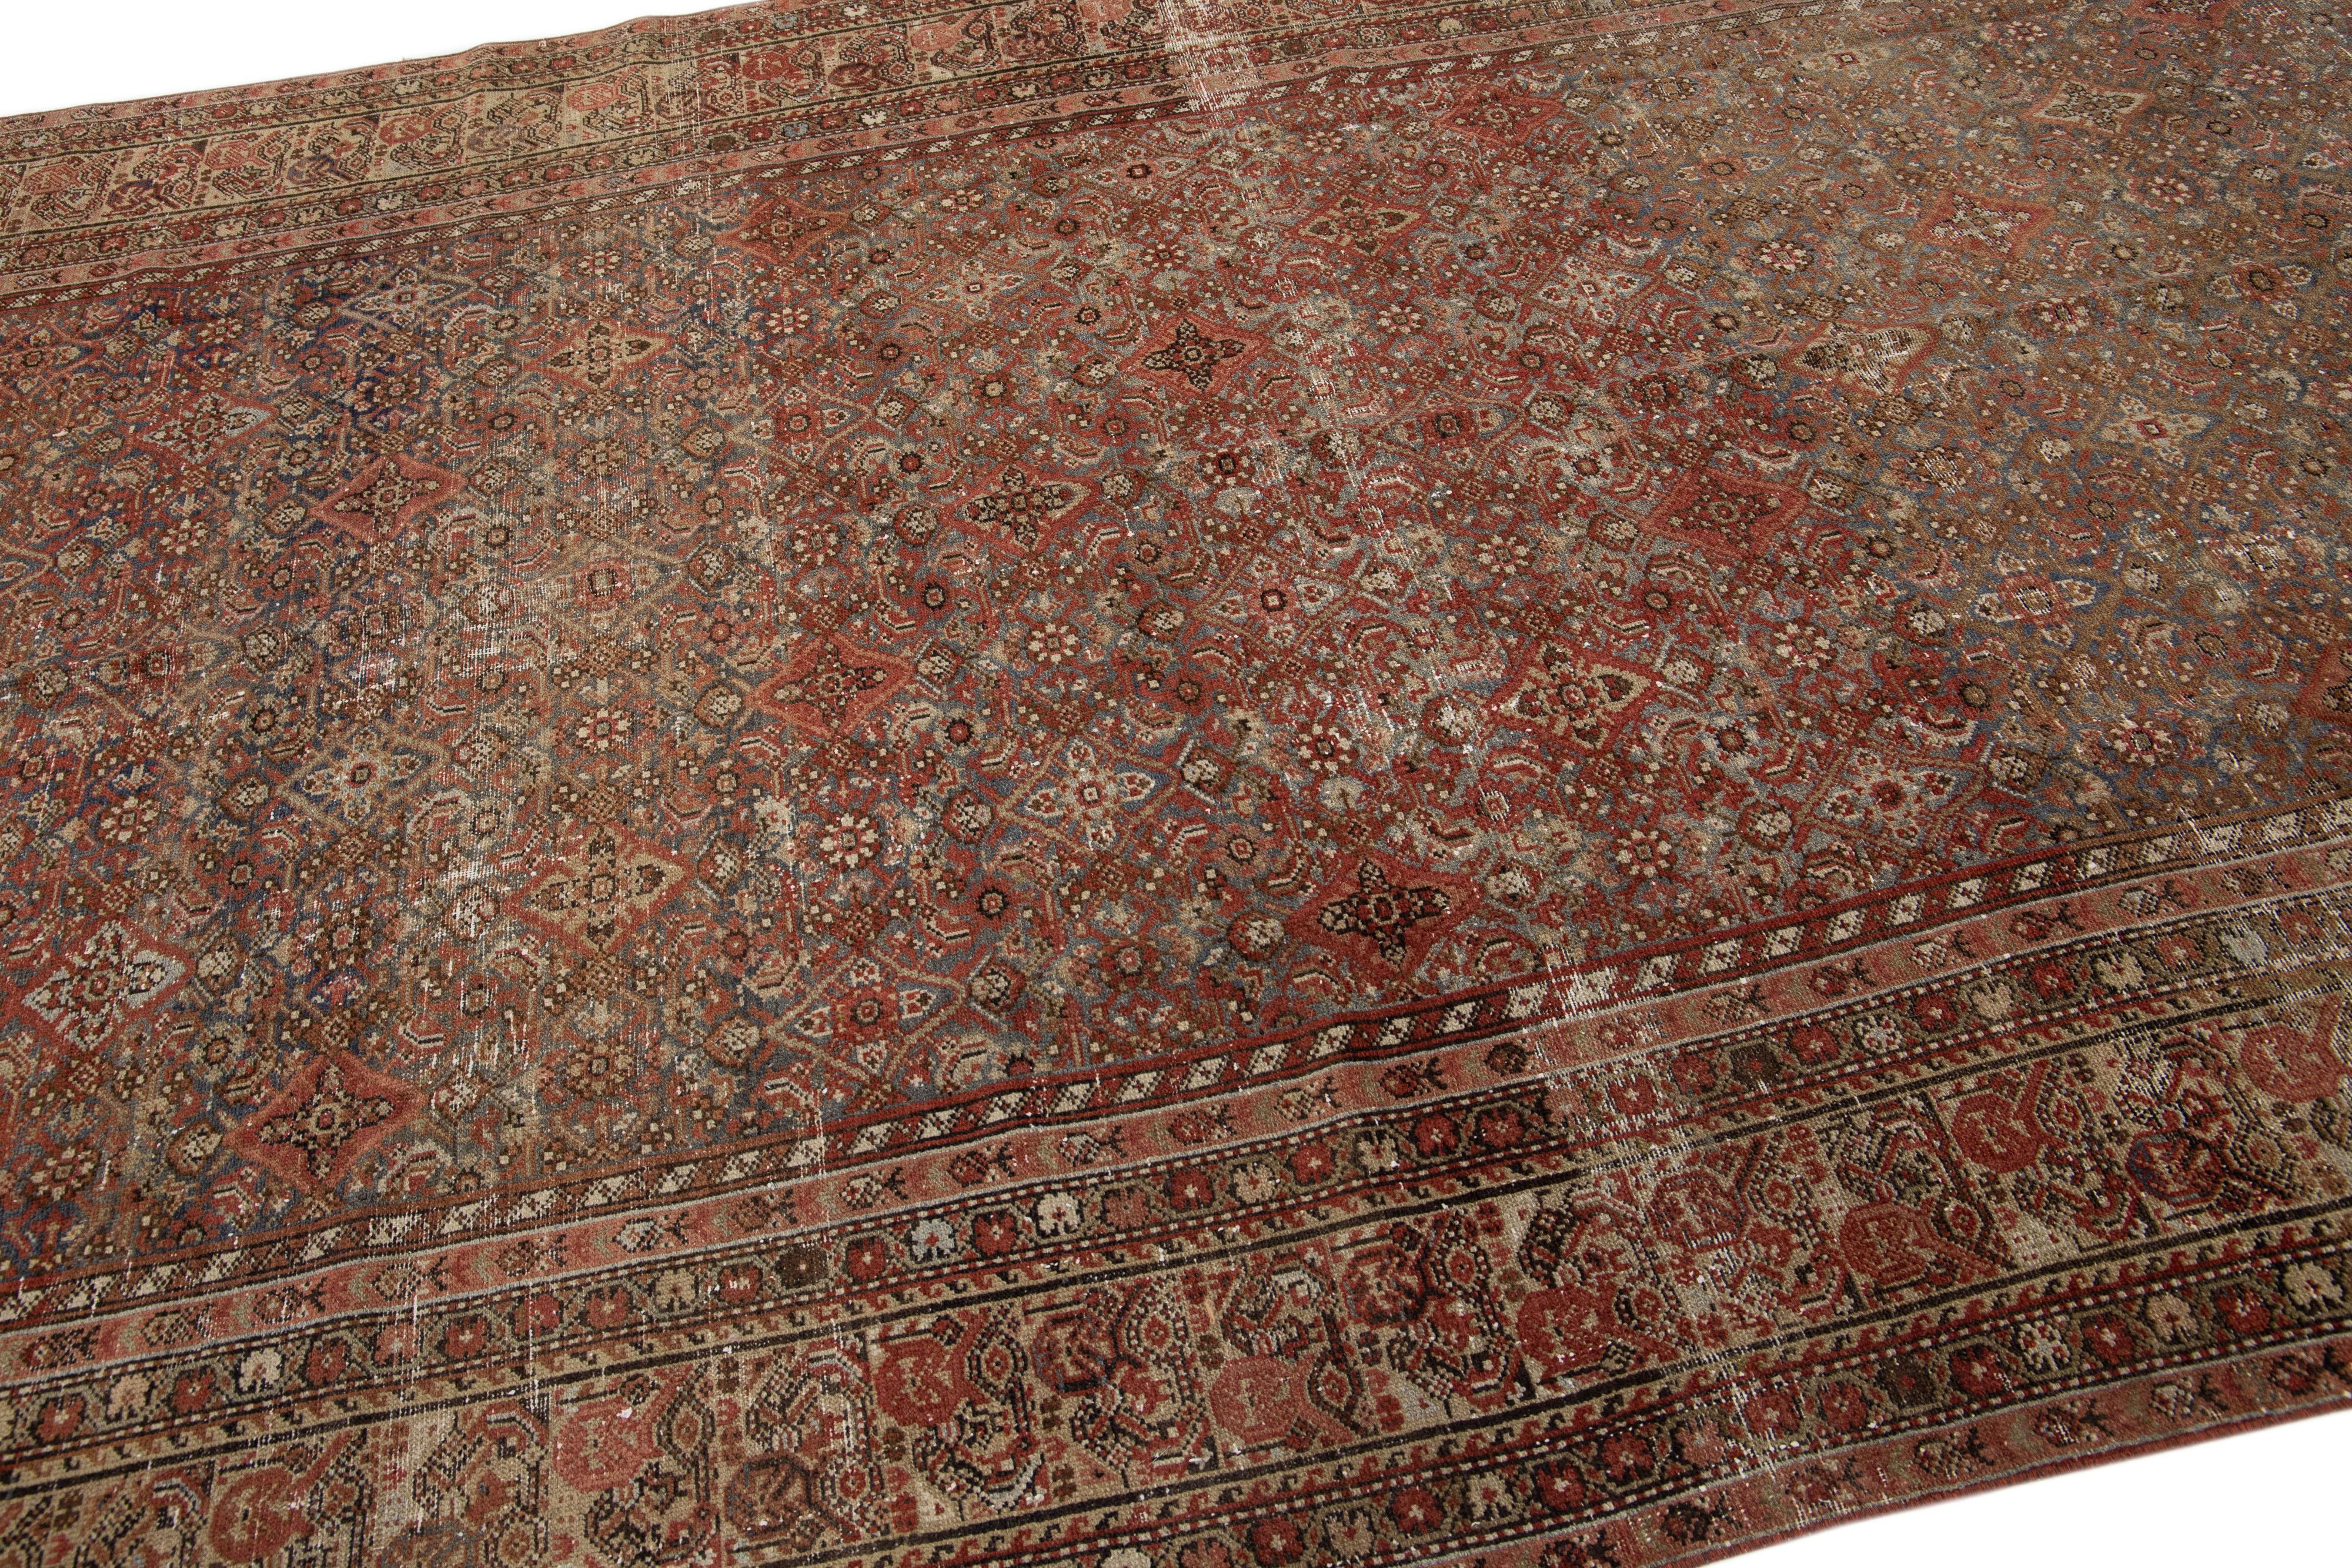 Handmade 1900s Antique Persian Malayer Gallery Wool Rug with Allover Motif In Good Condition For Sale In Norwalk, CT